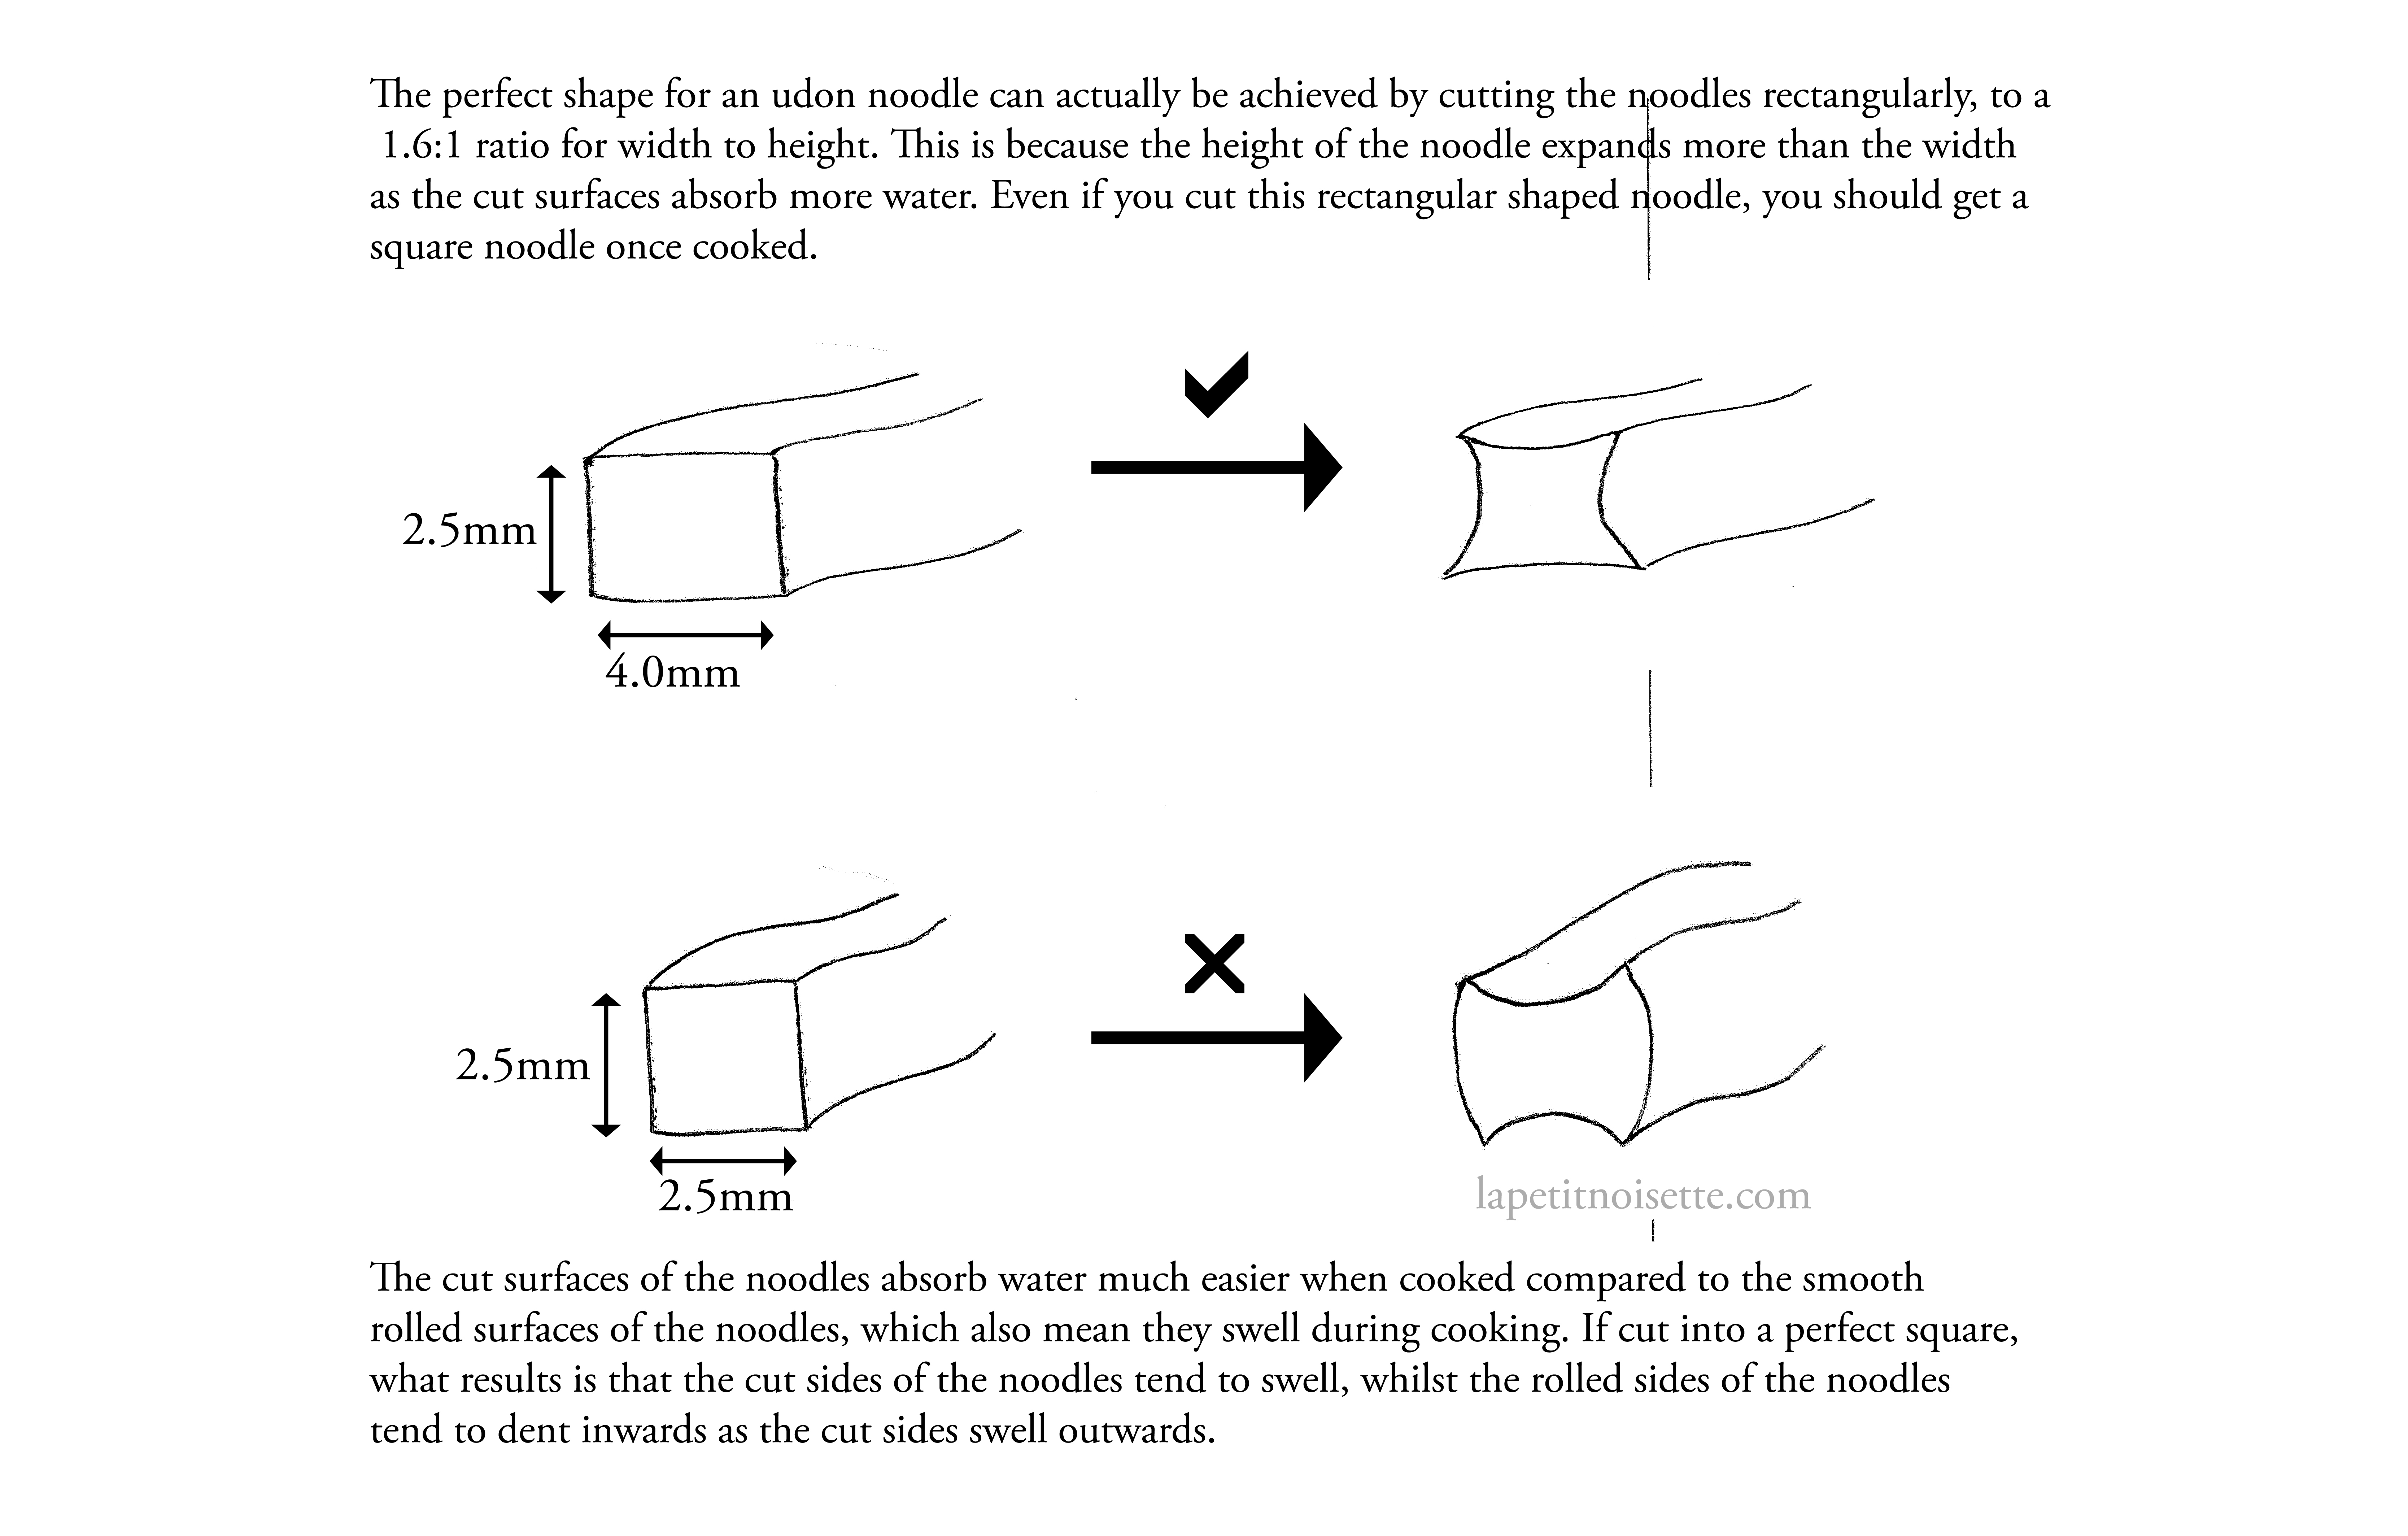 A diagram showing how cutting the udon noodles affects how it expands when its boiled.